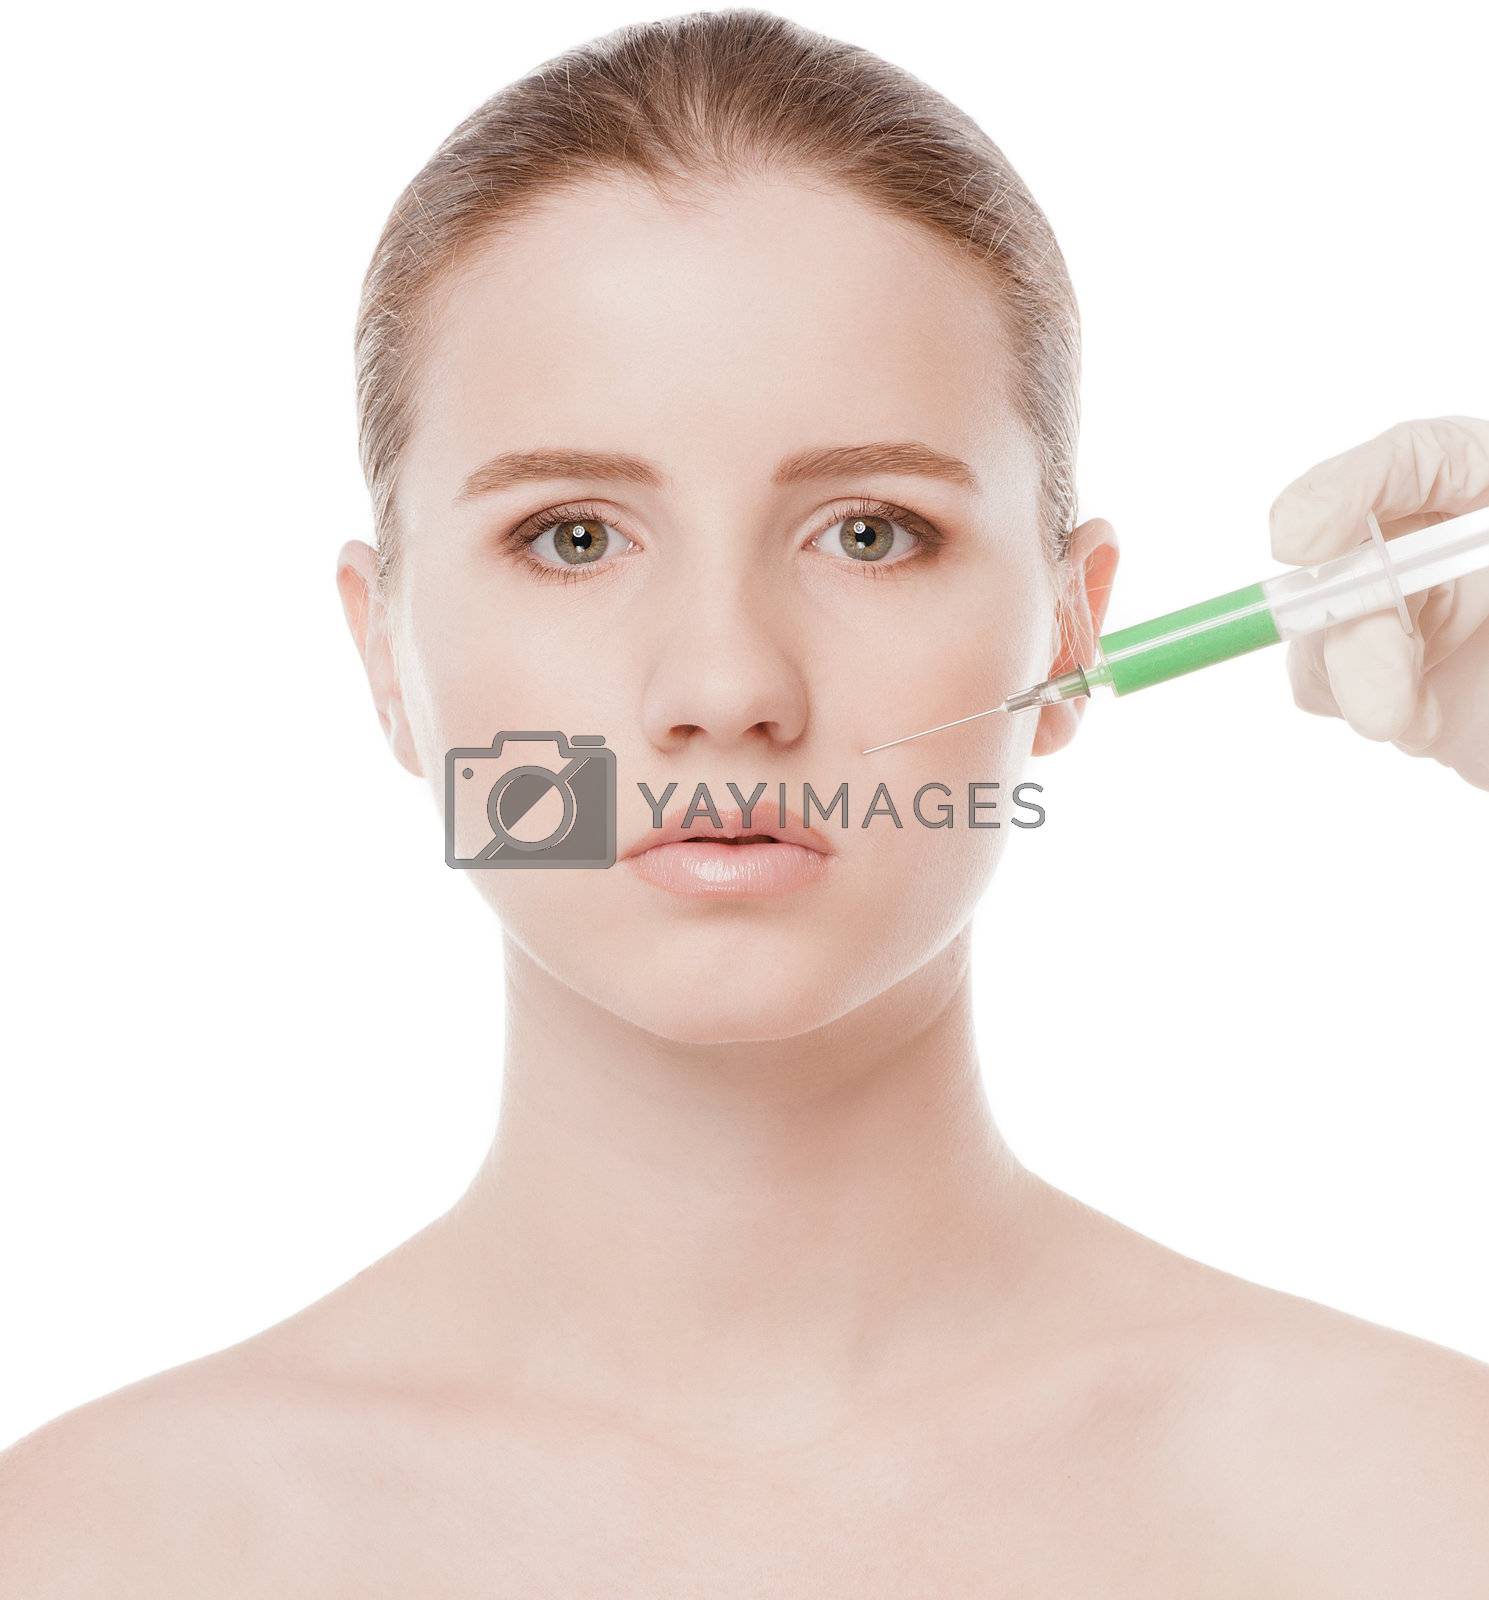 Royalty free image of Cosmetic botox injection in face by markin